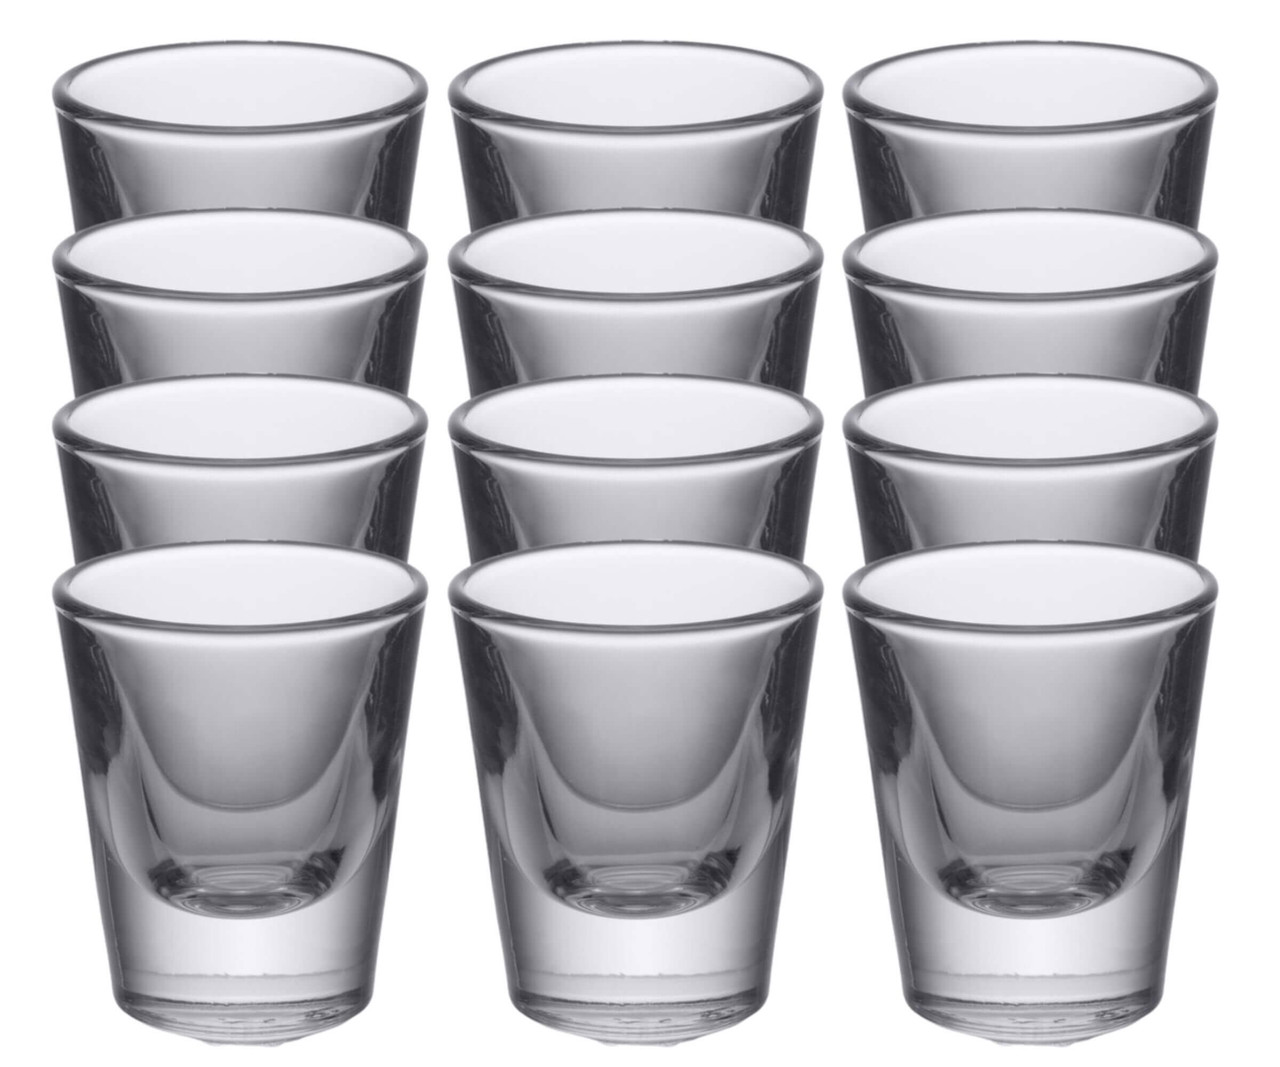 Libbey Set of 12 Shot Glasses - 1.25 oz. | Durable, Crystal Clear-Chicken Pieces